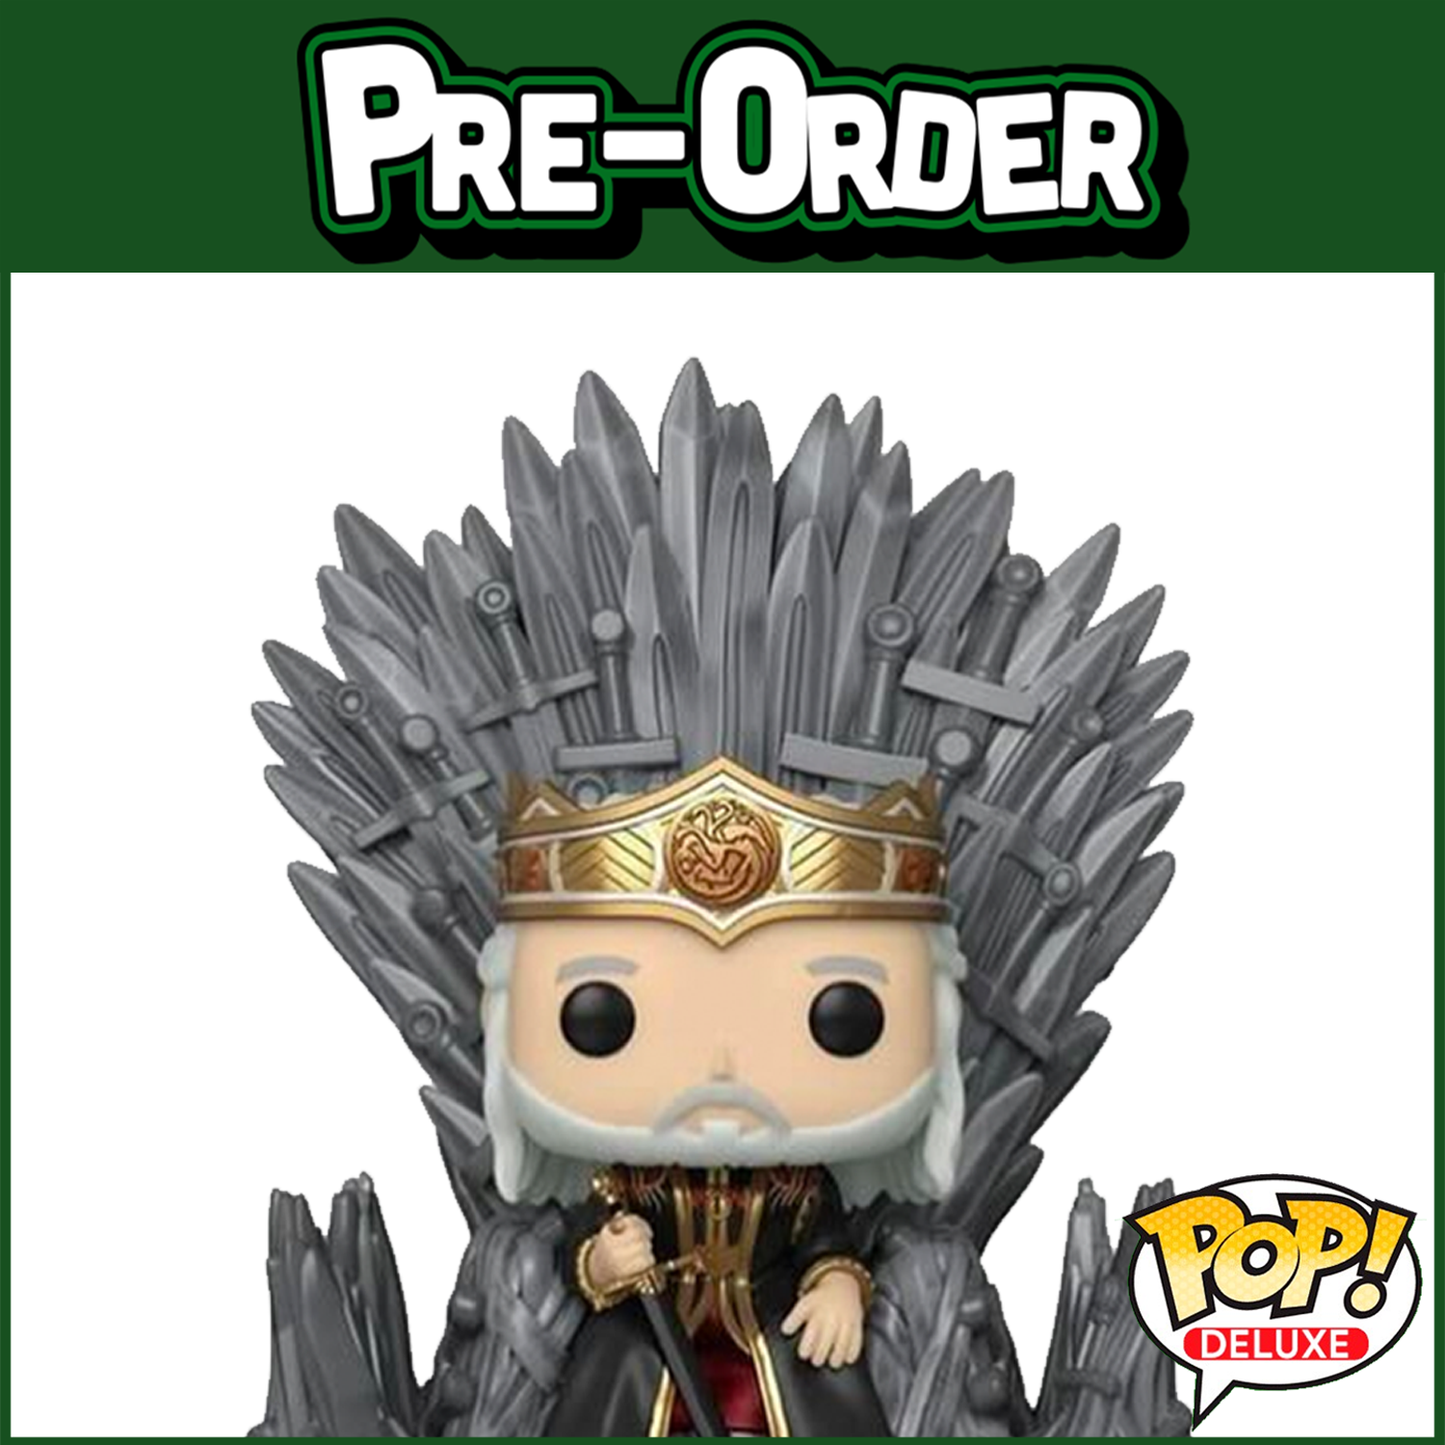 (PRE-ORDER) Funko POP! Deluxe: House of the Dragon - Viserys on the Iron Throne #12